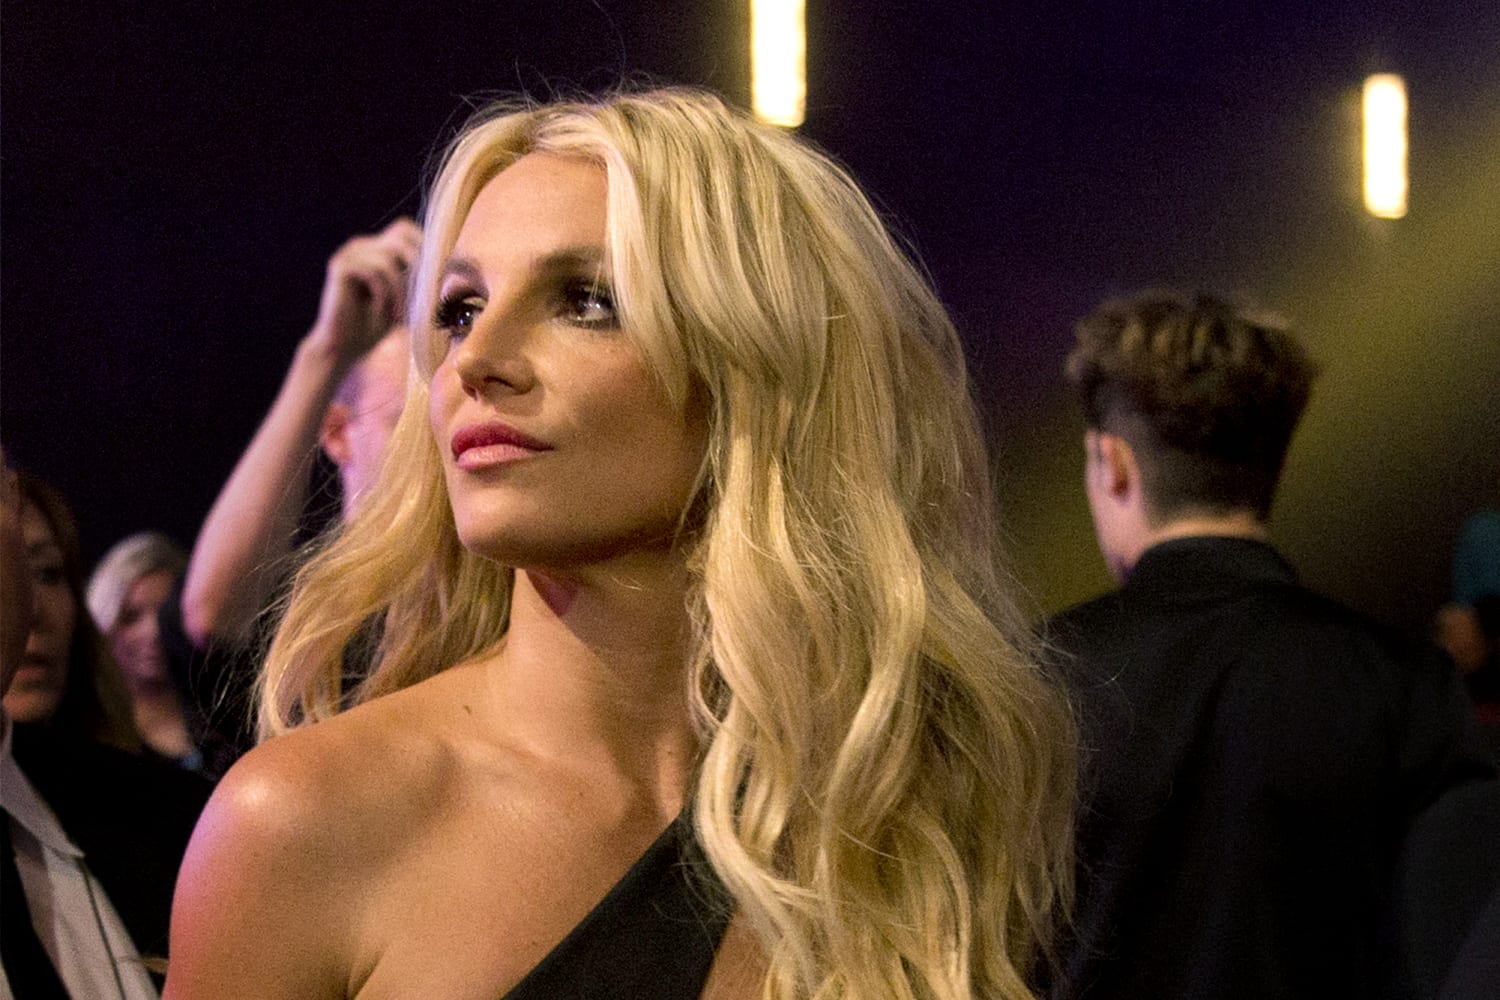 Is there any word from Britney Spears?